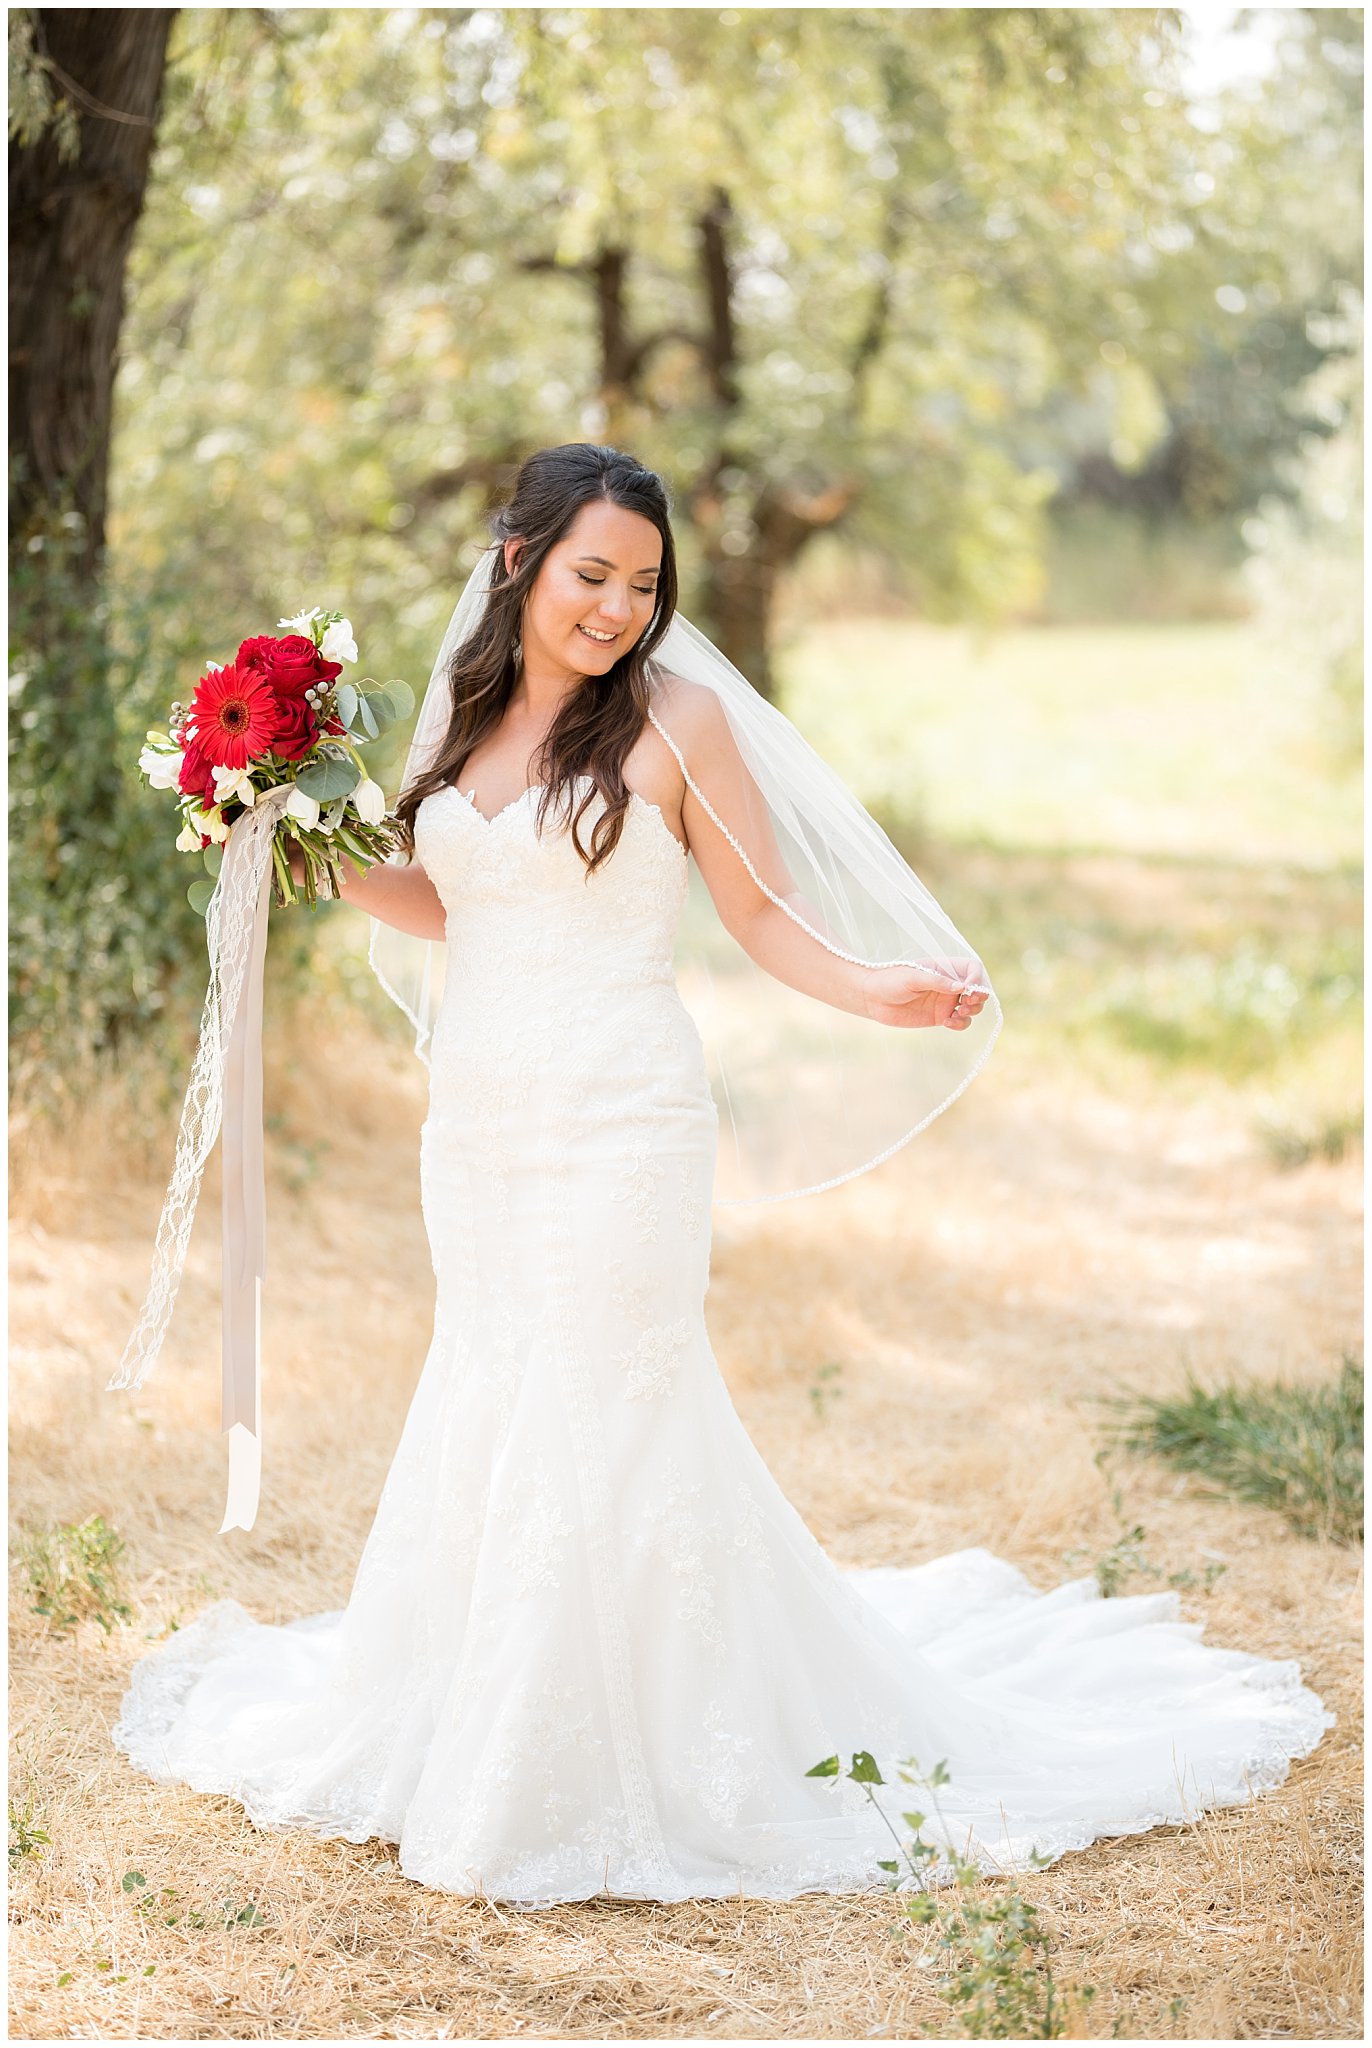 Candid, elegant bridal portrait of bride and her veil | Davis County Outdoor Wedding | Jessie and Dallin Photography